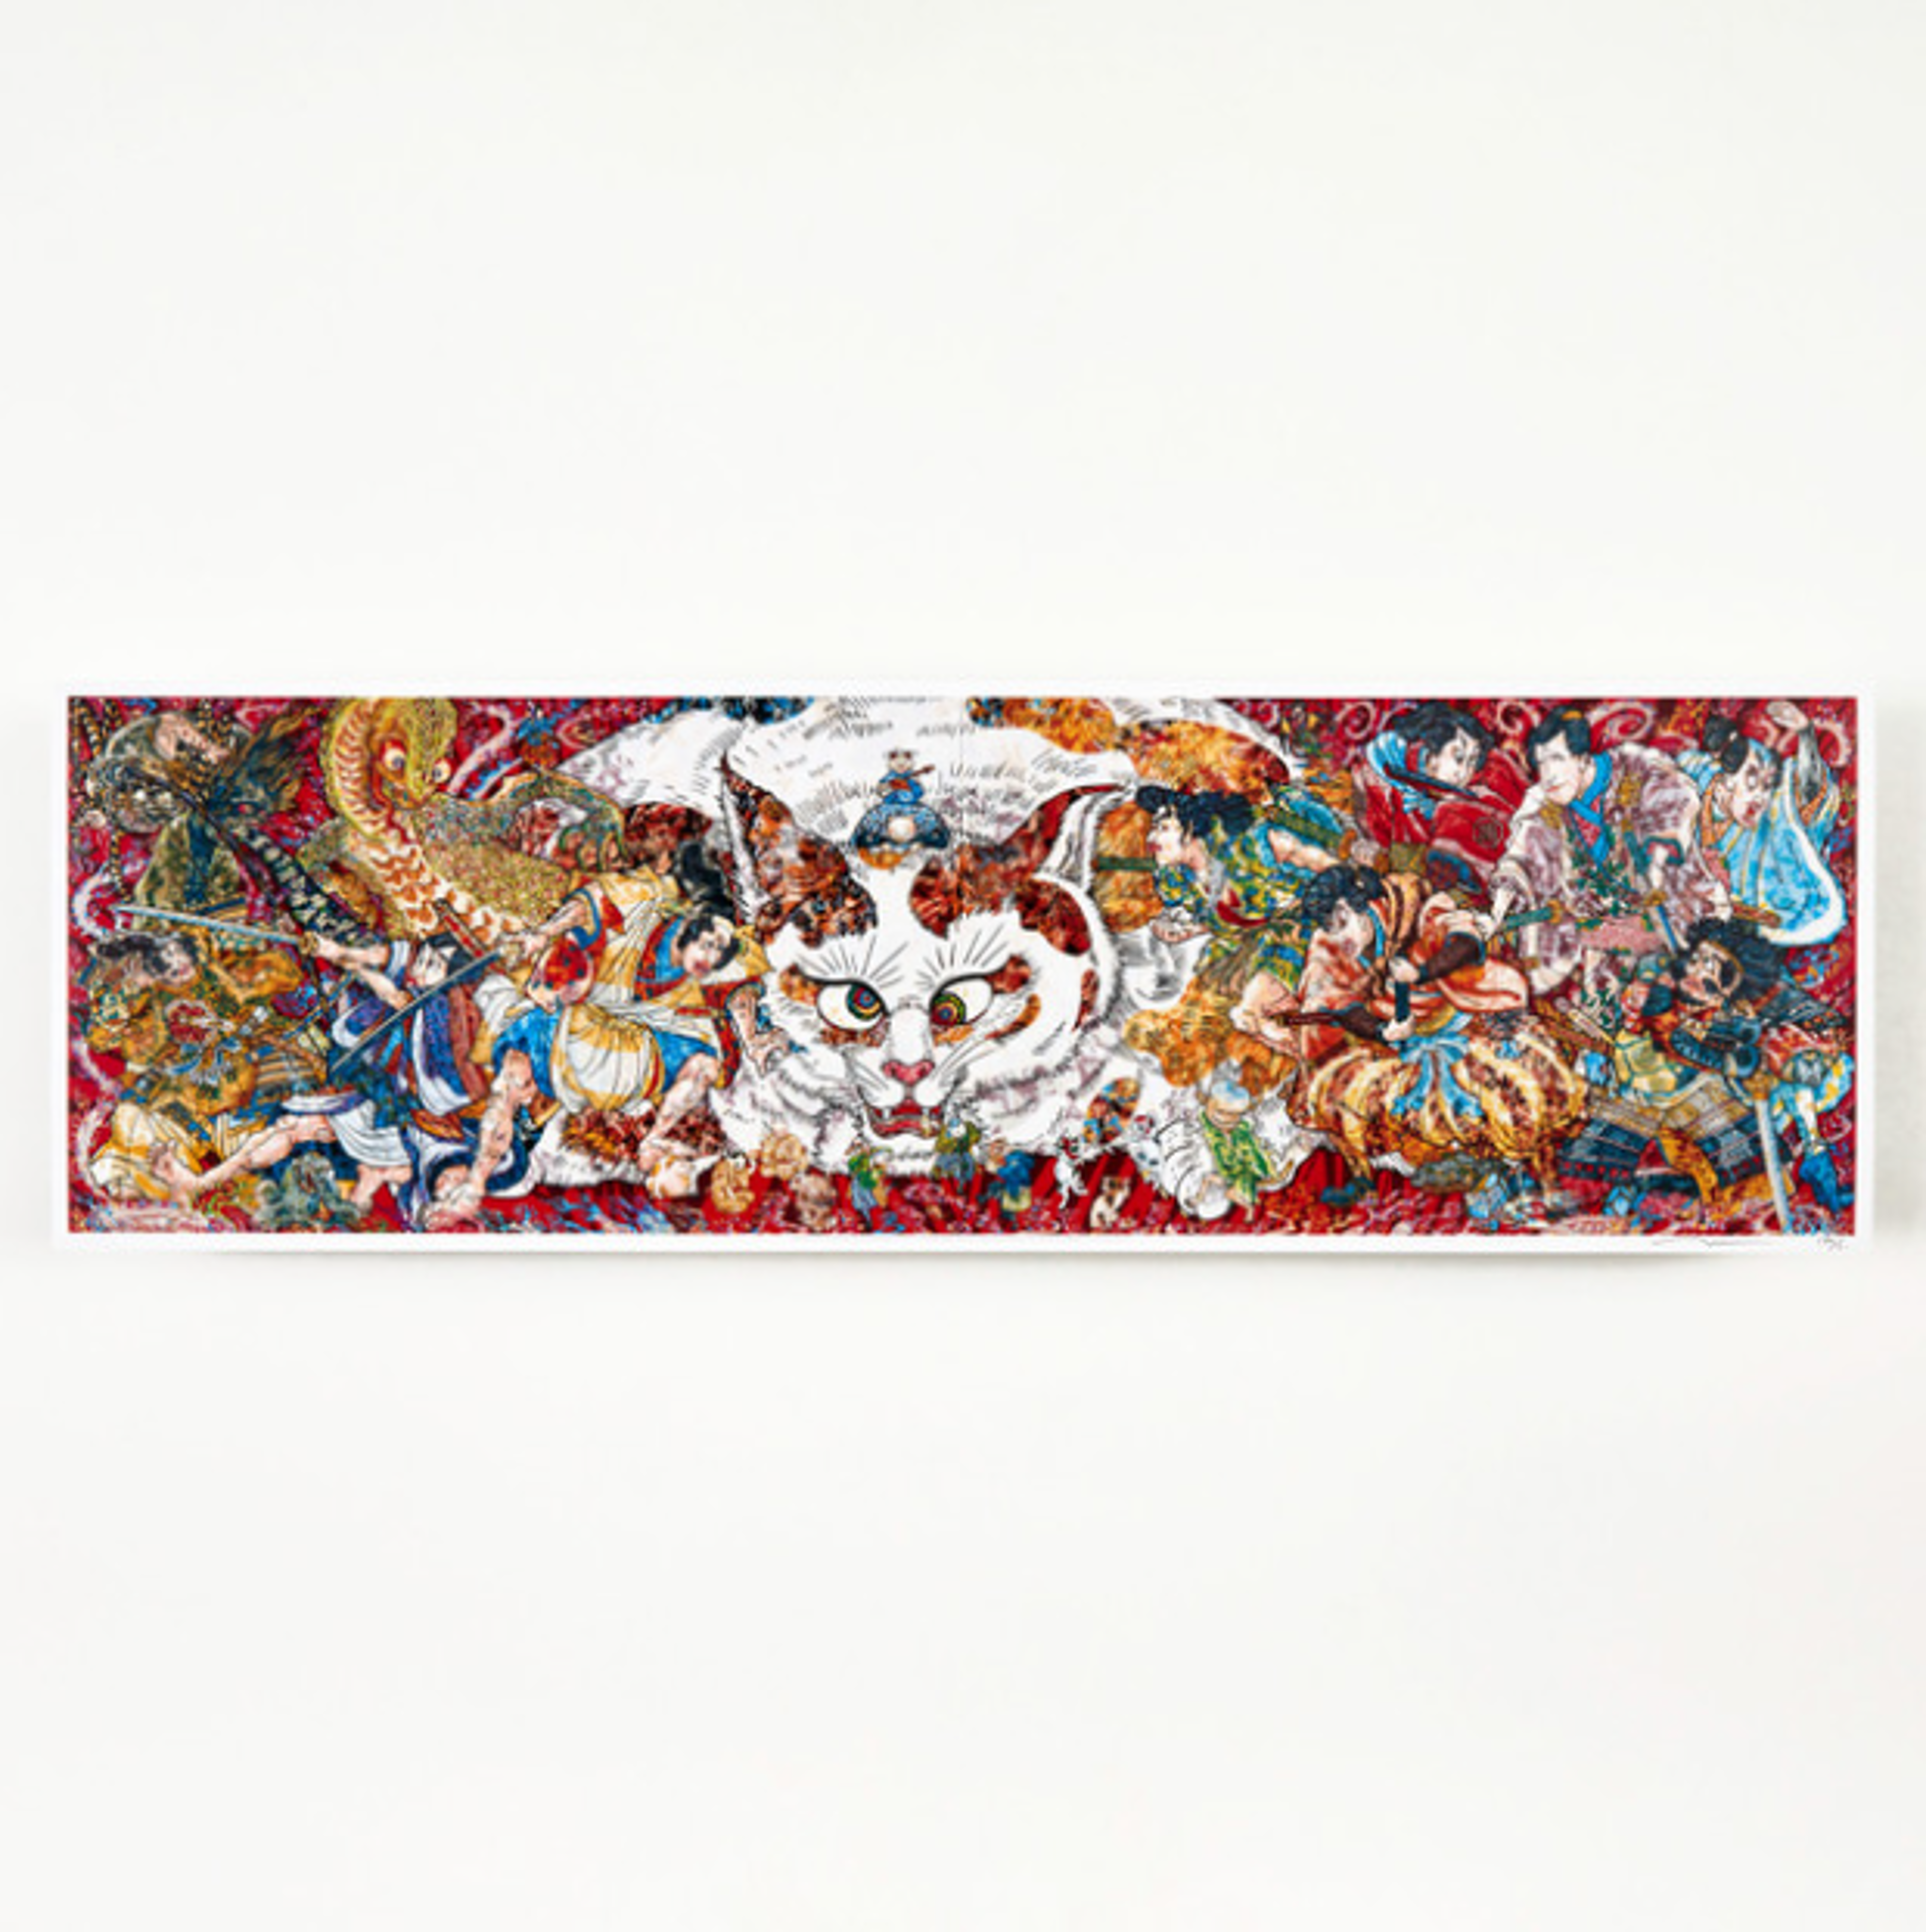 Takashi Murakami signed and numbered limited-edition Australia a